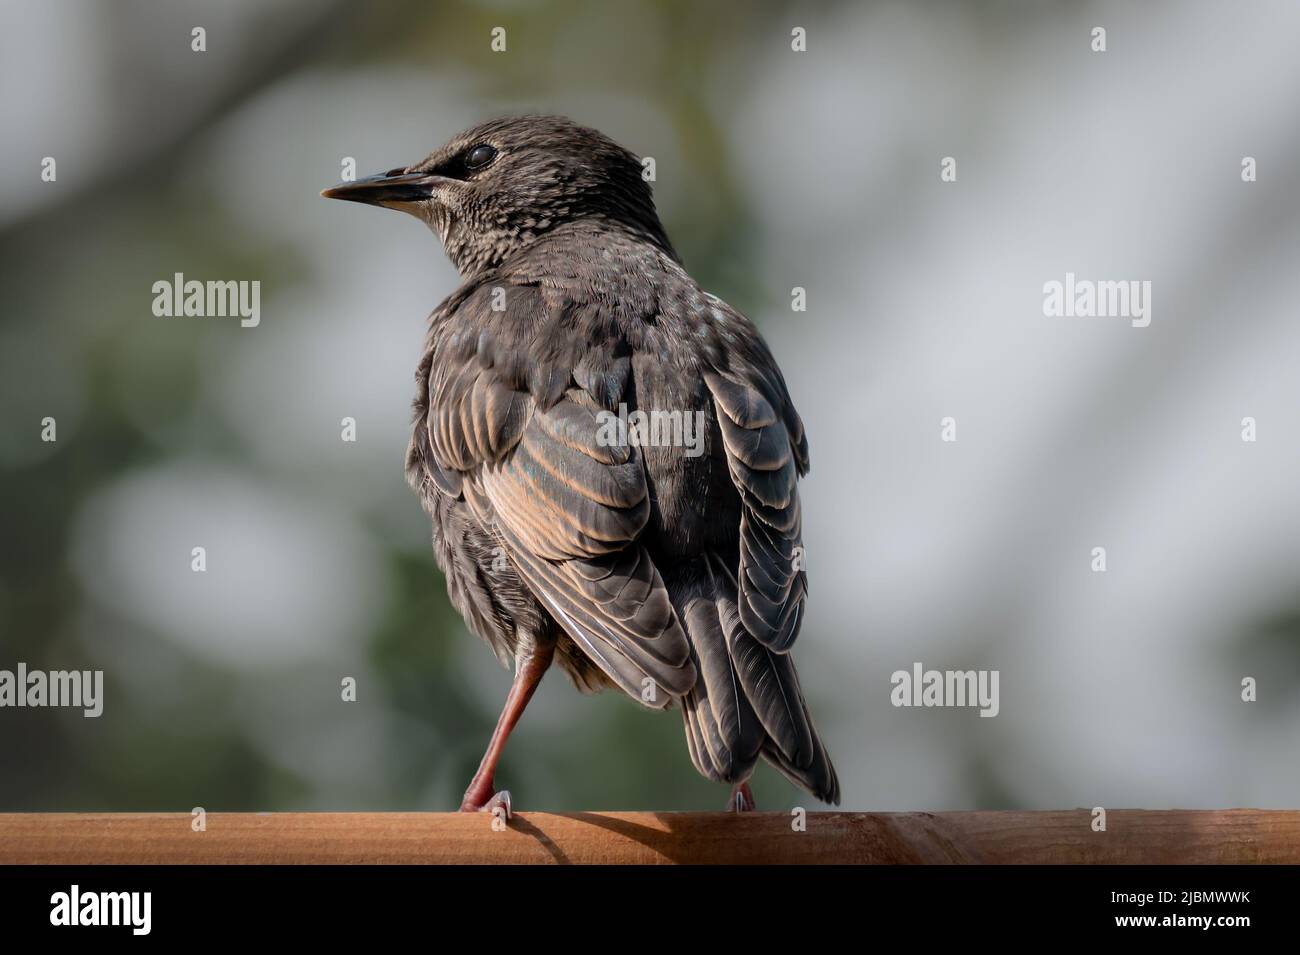 Back and wings of juvenile fledgling starling on wooden feeder Stock Photo